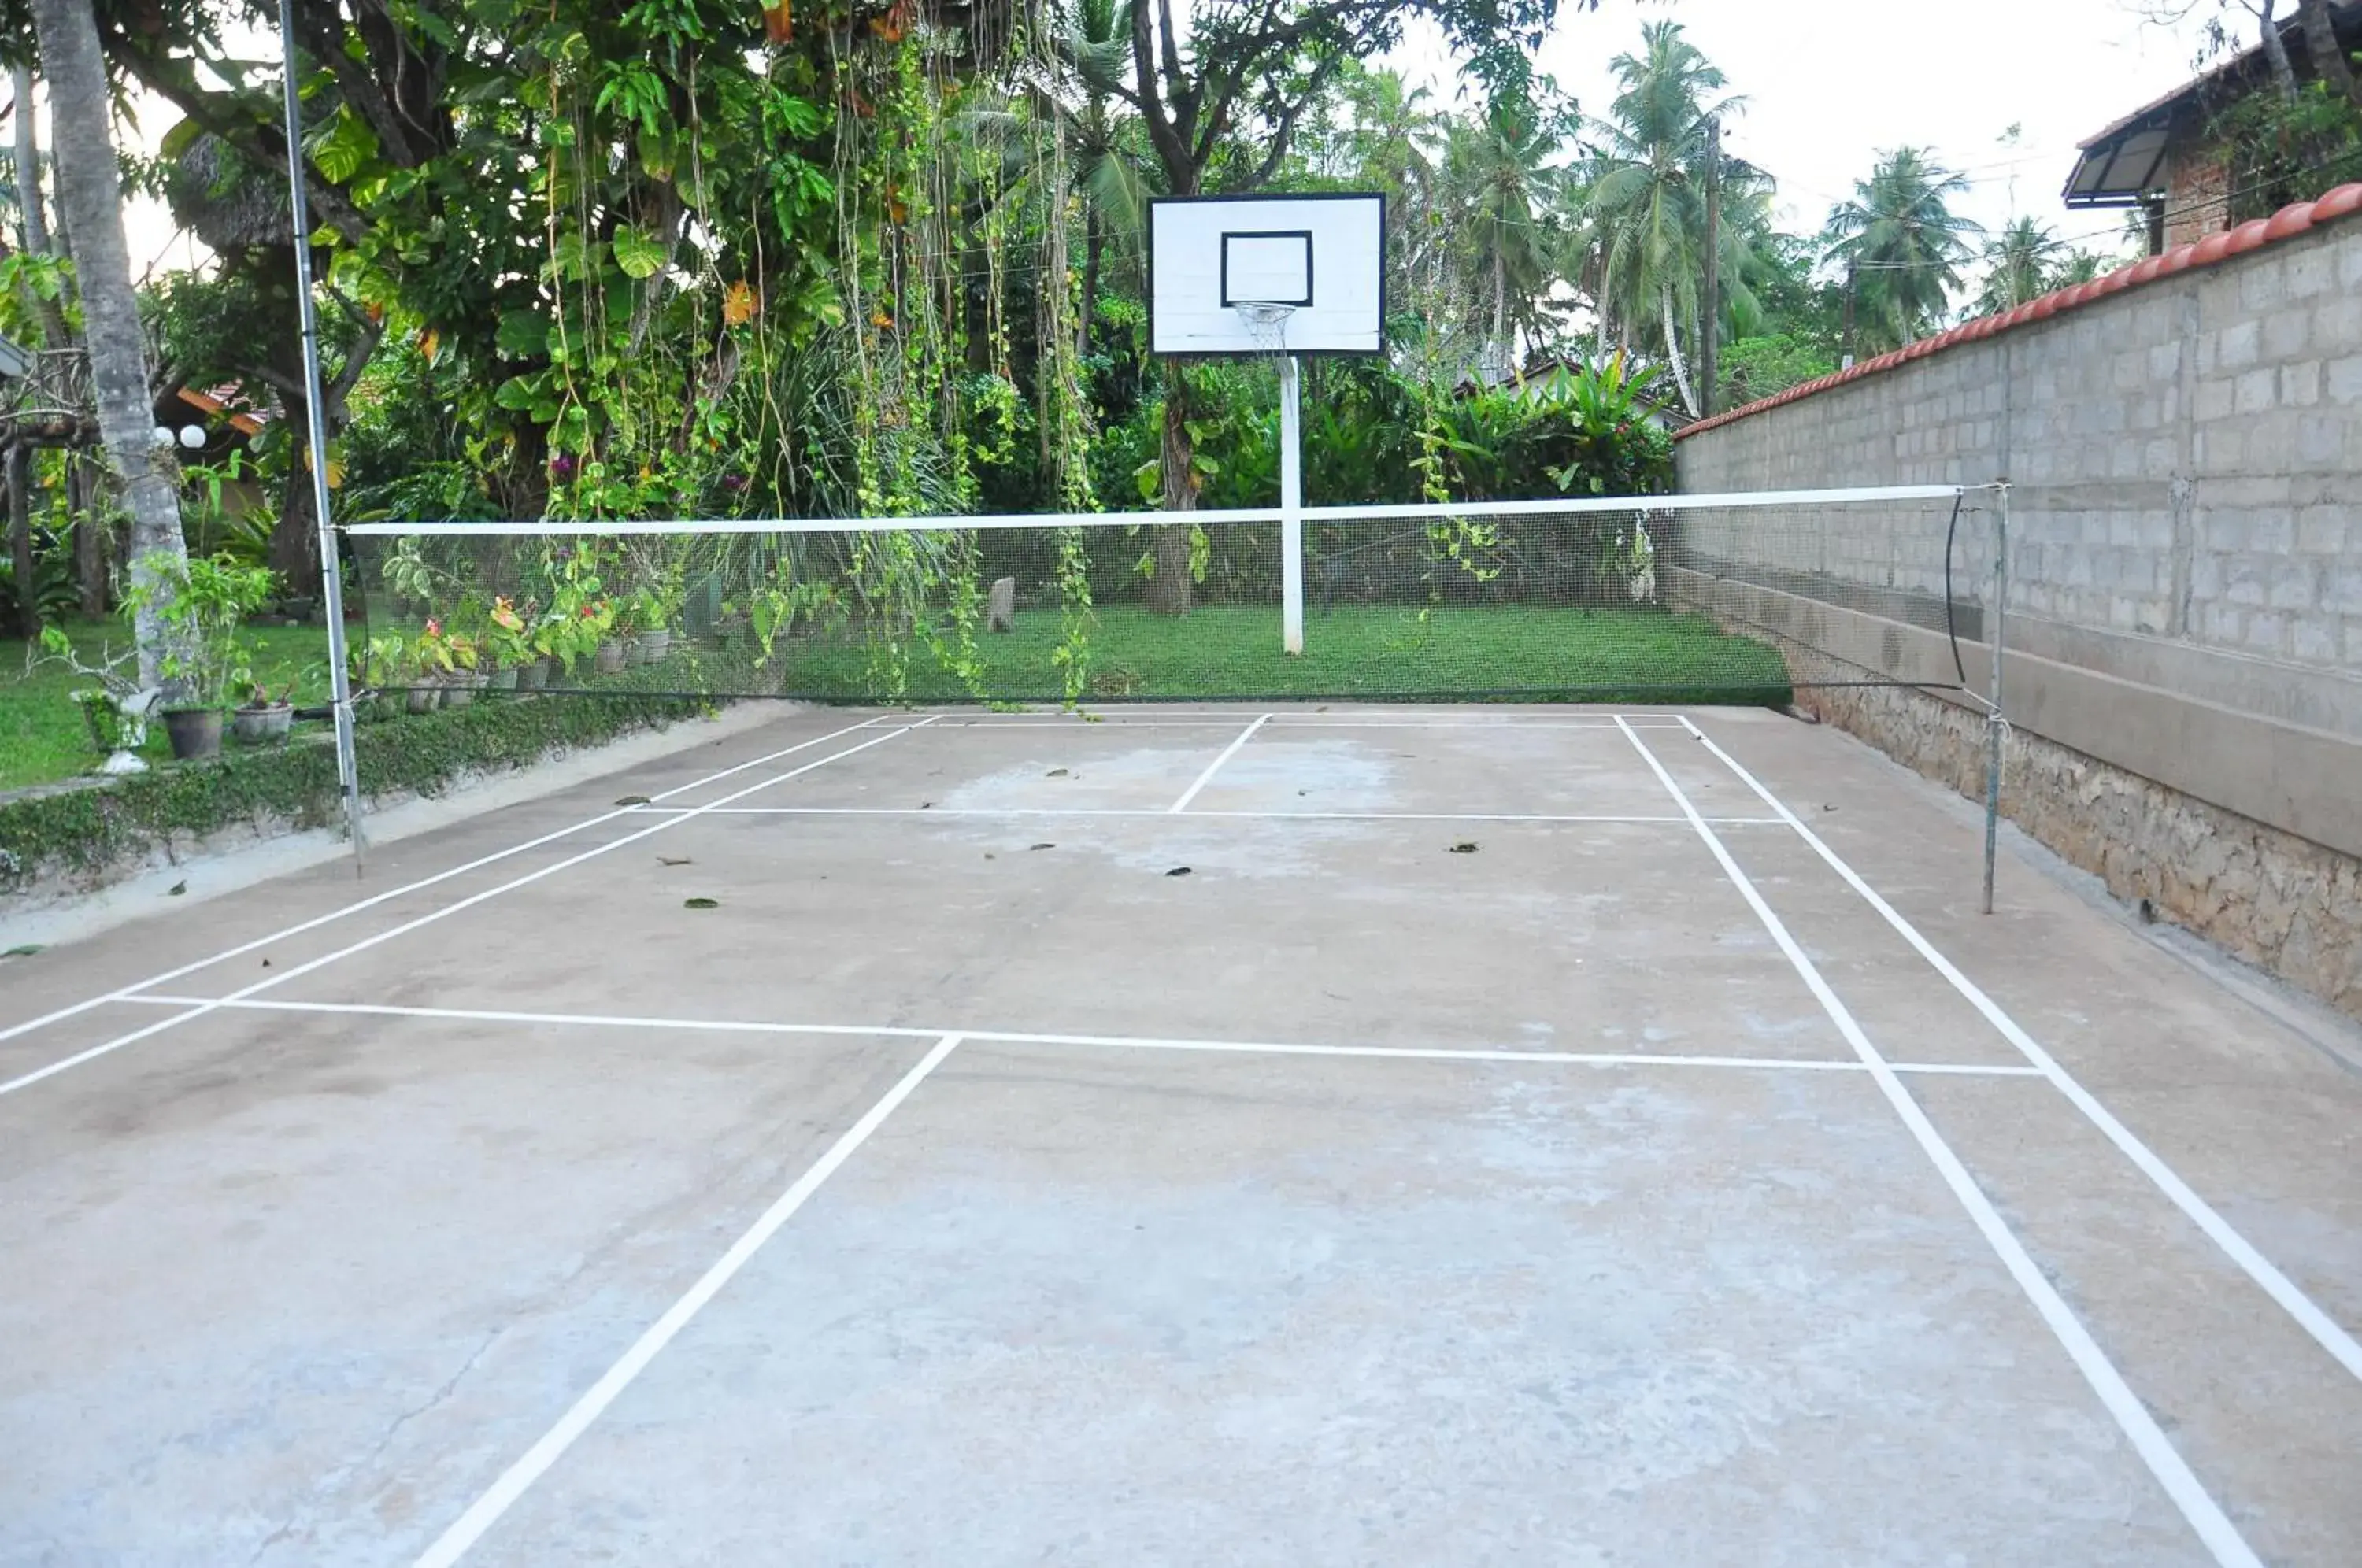 Sports, Other Activities in Villa Shade